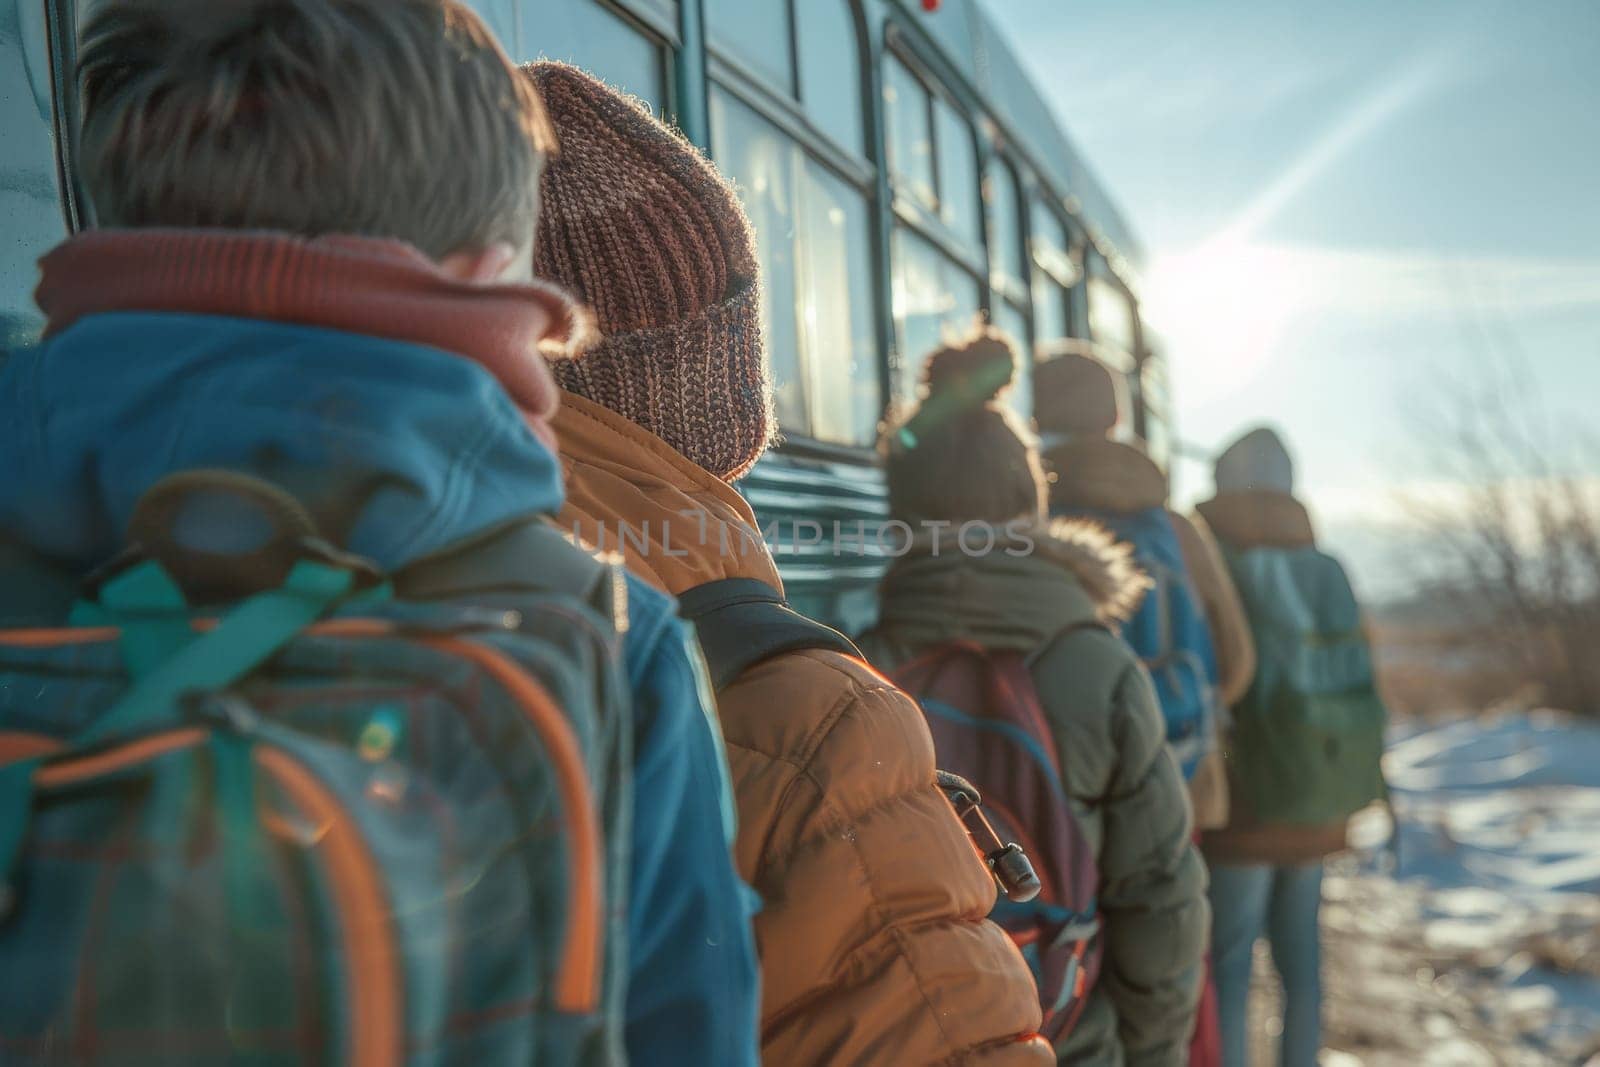 A group of children are standing in line to board a bus by itchaznong